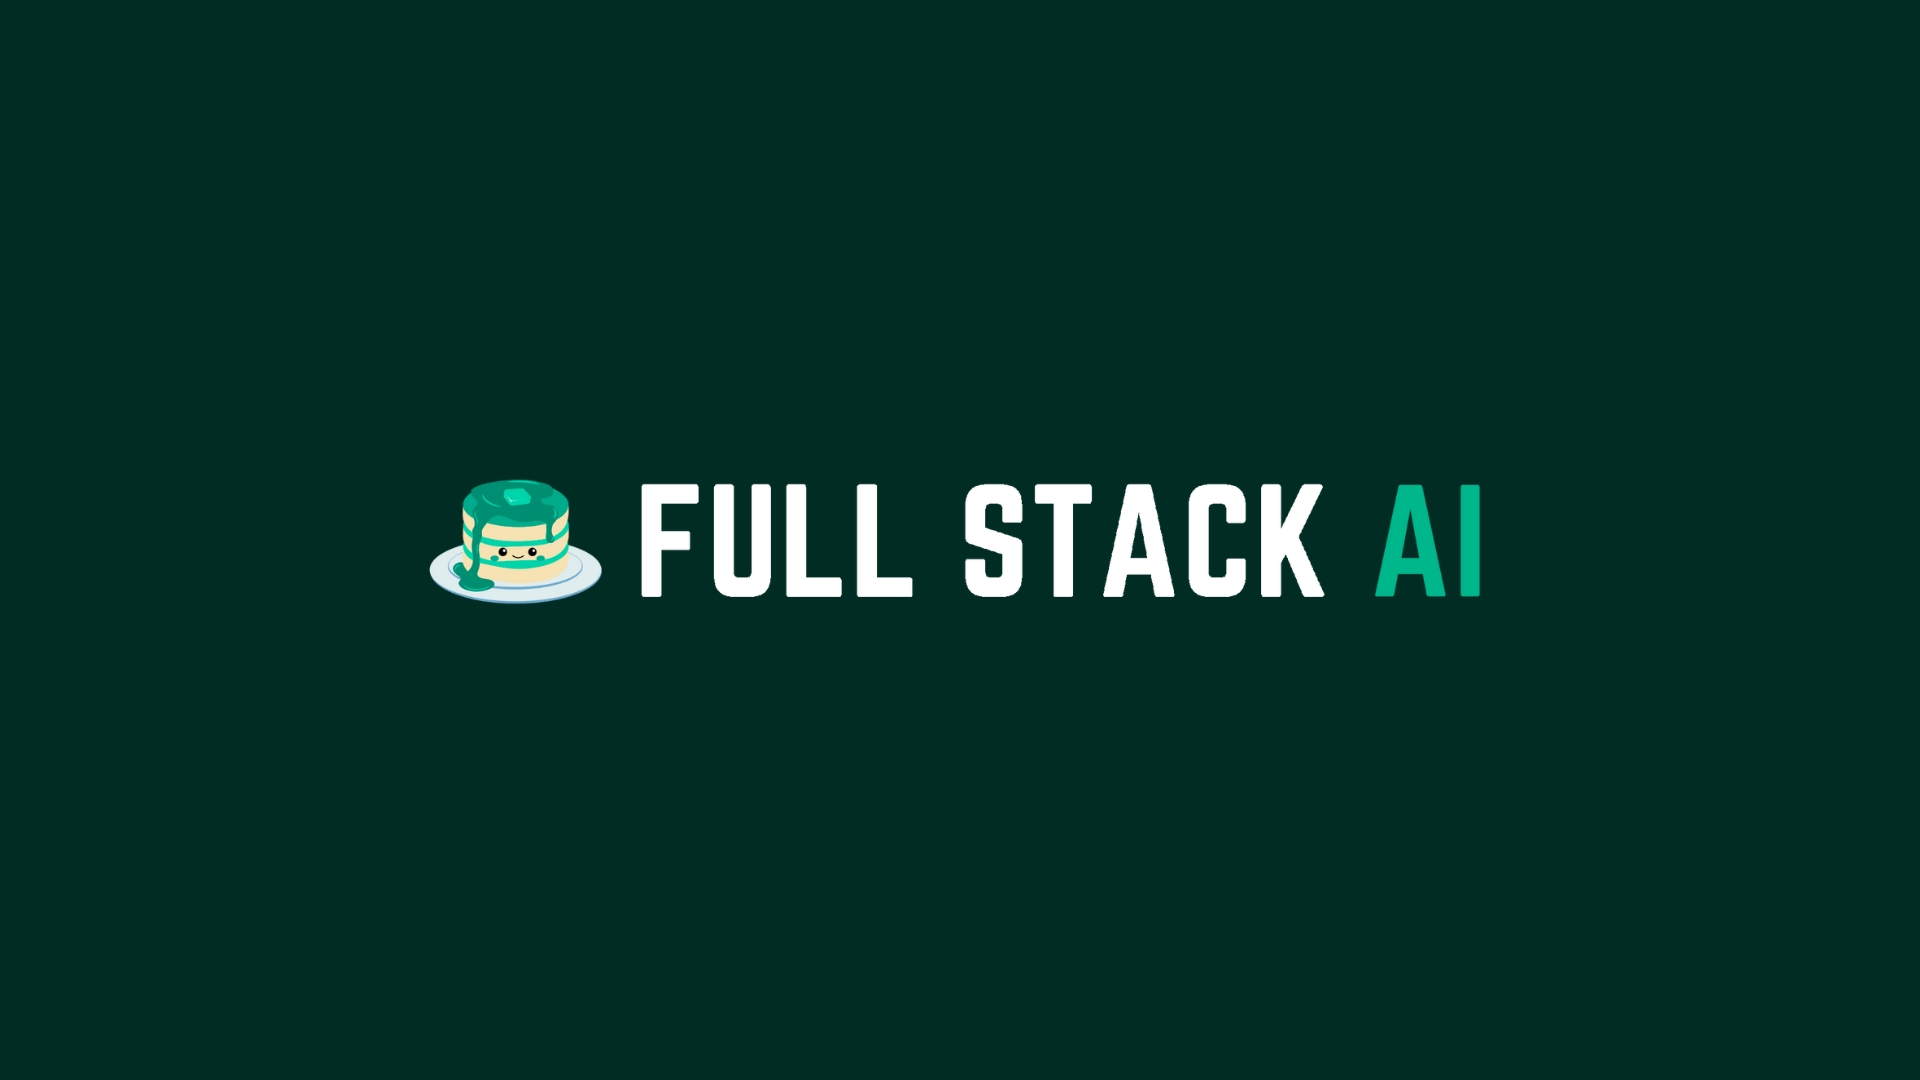 Featured on Full Stack AI